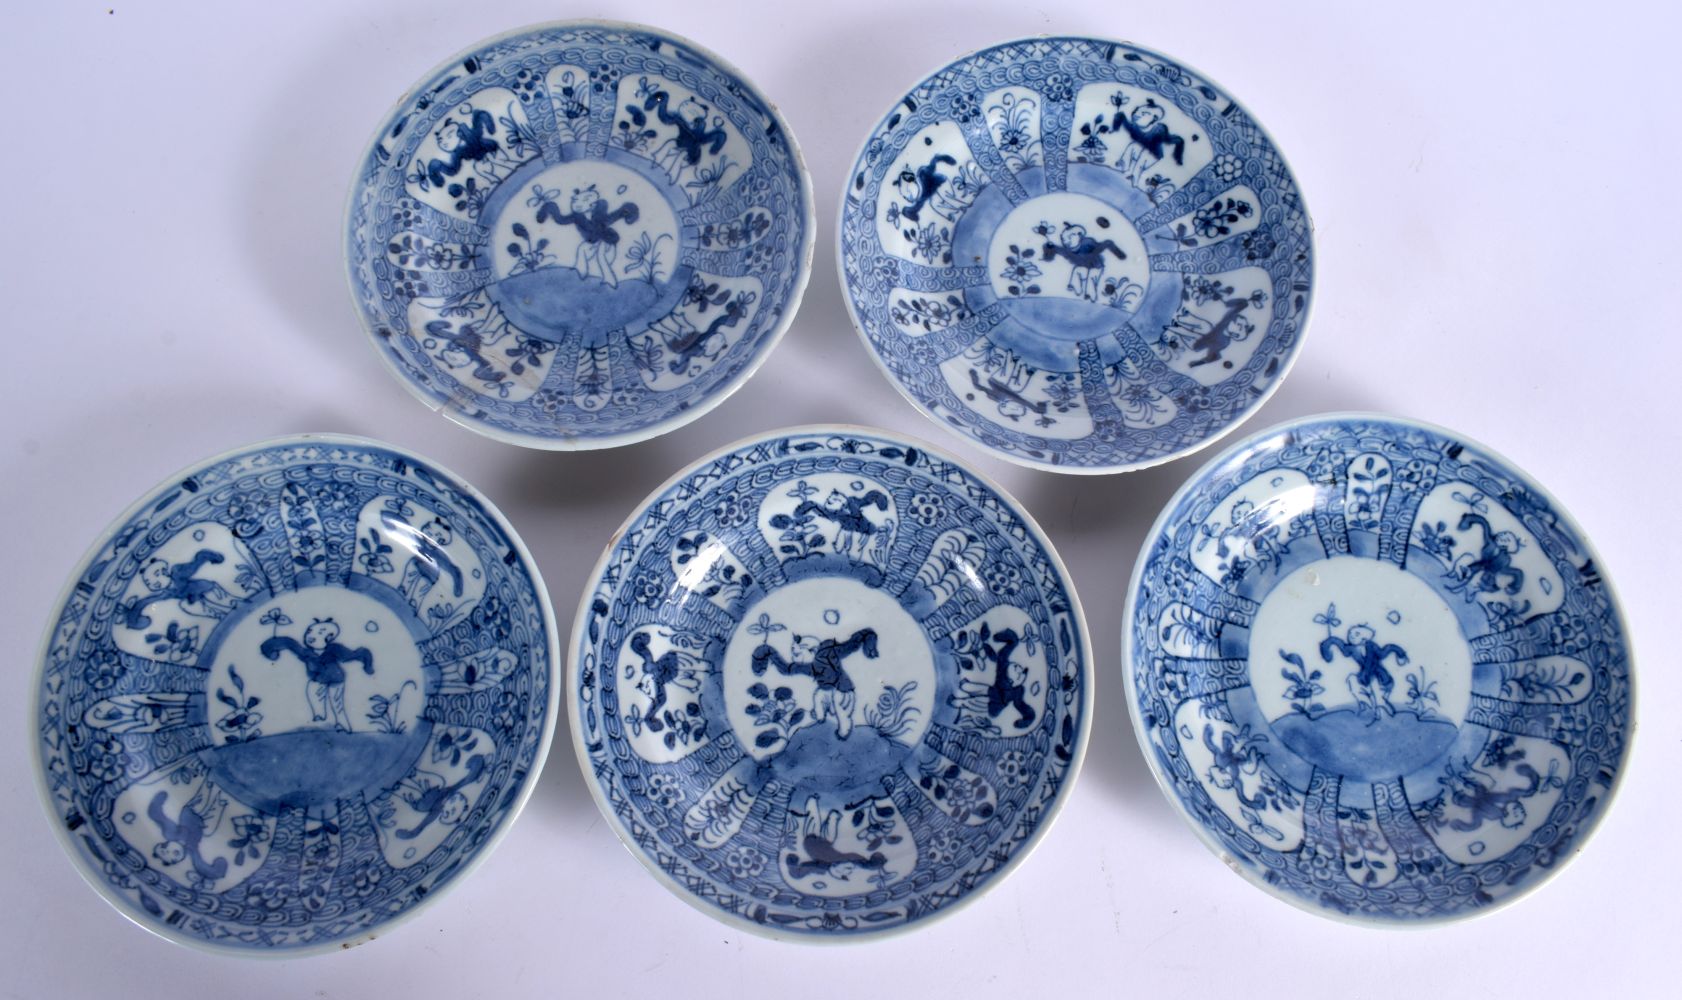 A SET OF FIVE LATE 17TH CENTURY CHINESE BLUE AND WHITE PORCELAIN PLATES Kangxi. 15.5 cm diameter. (5